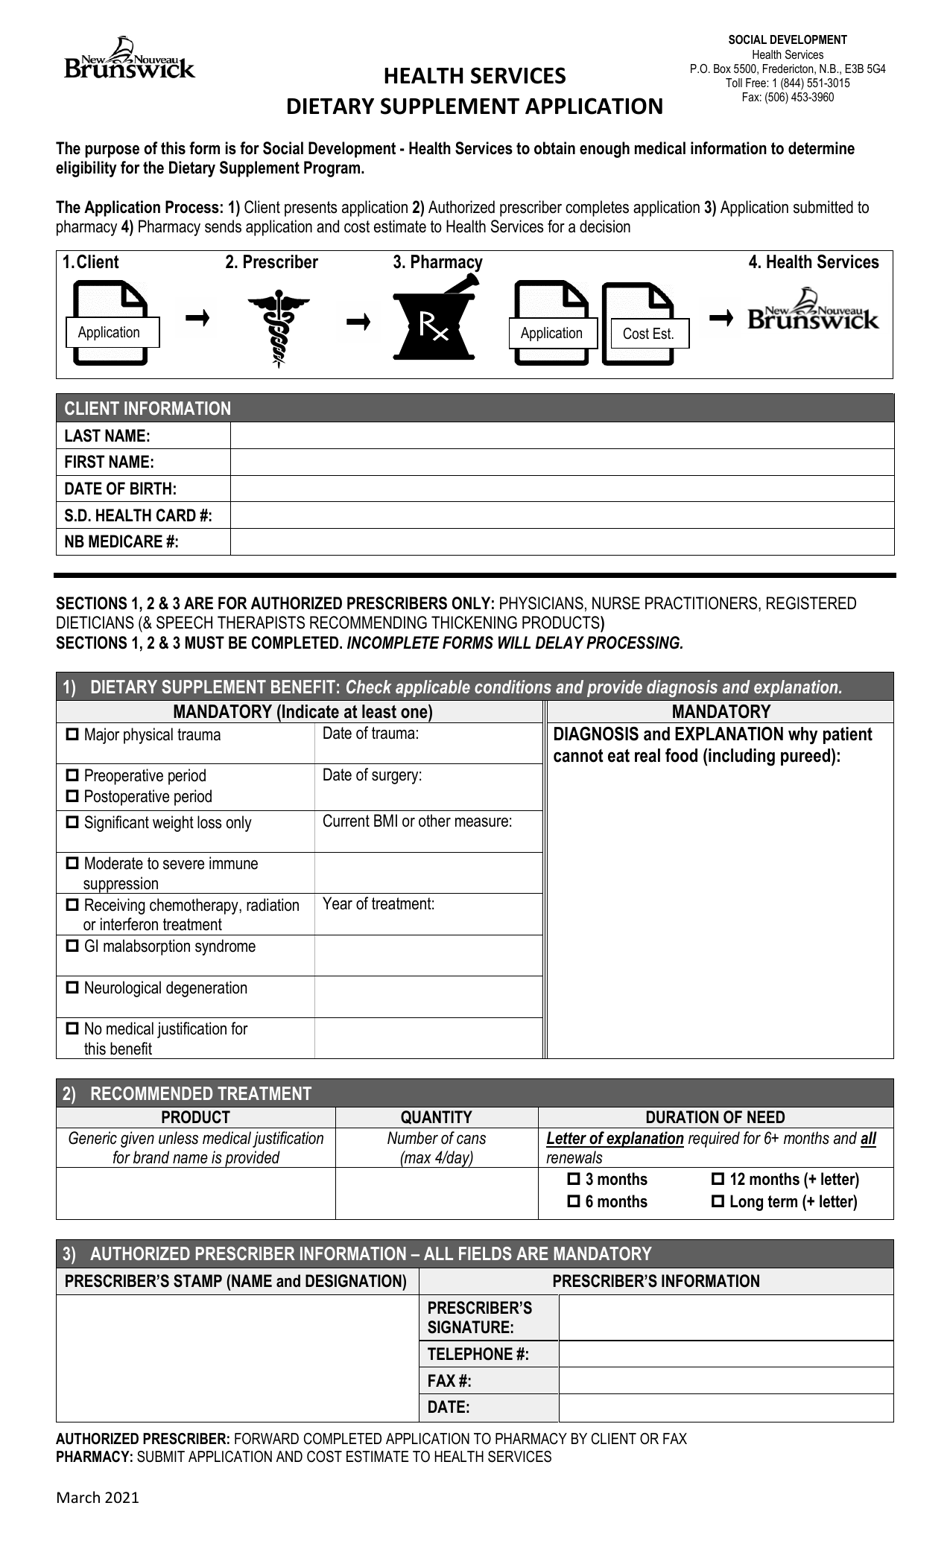 Health Services Dietary Supplement Application - New Brunswick, Canada, Page 1